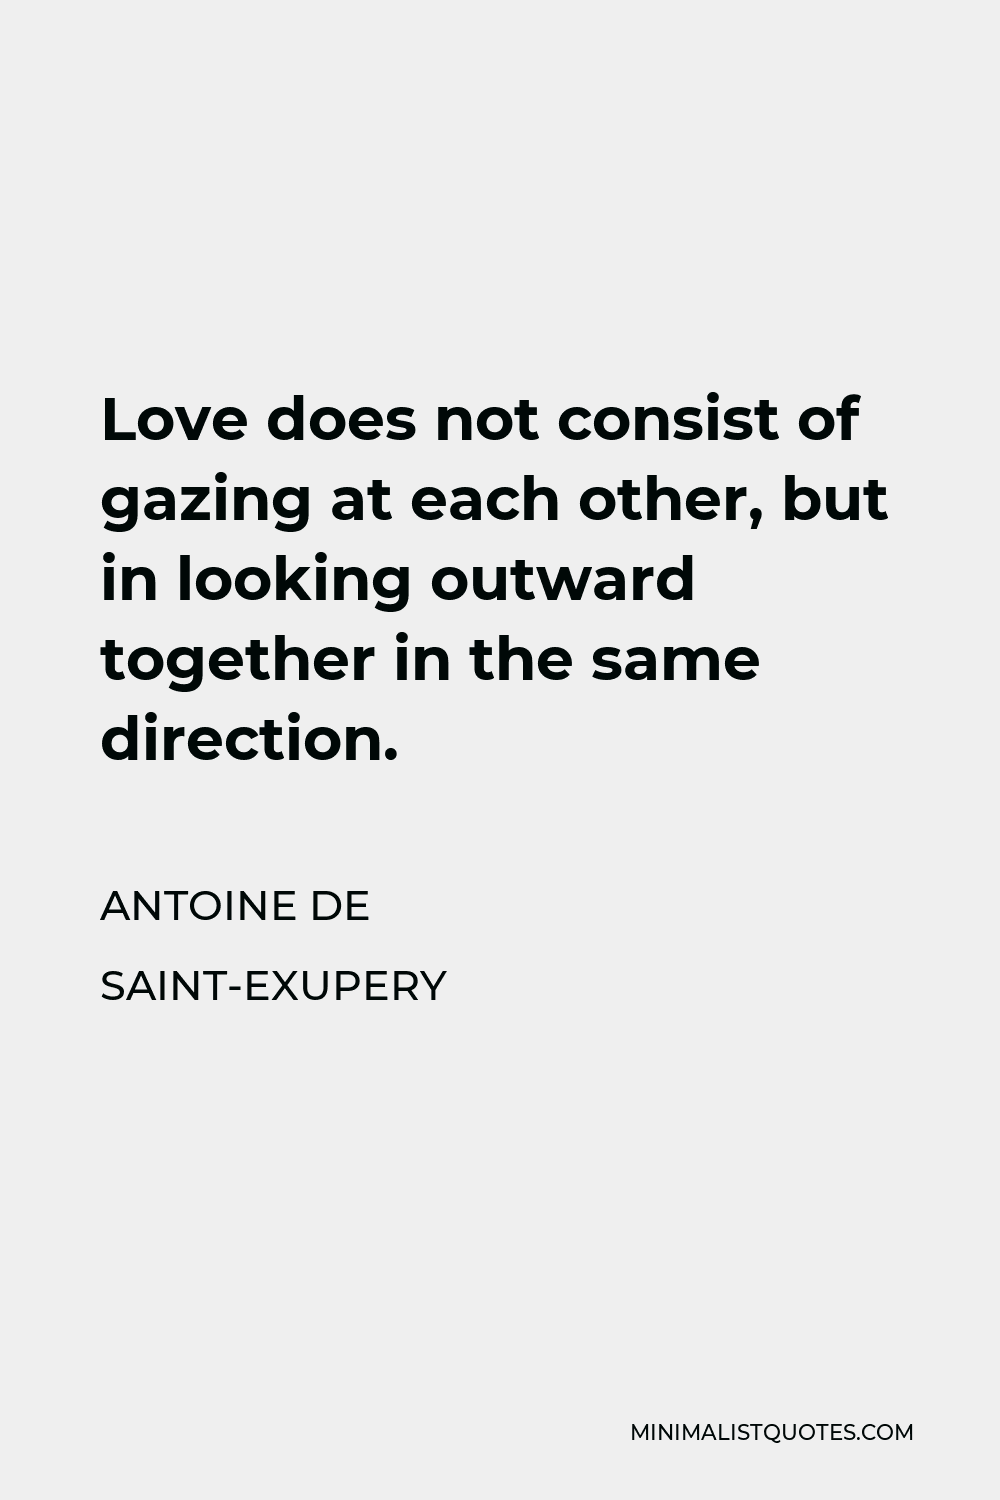 Antoine de Saint-Exupery Quote: Love does not consist of gazing at each ...